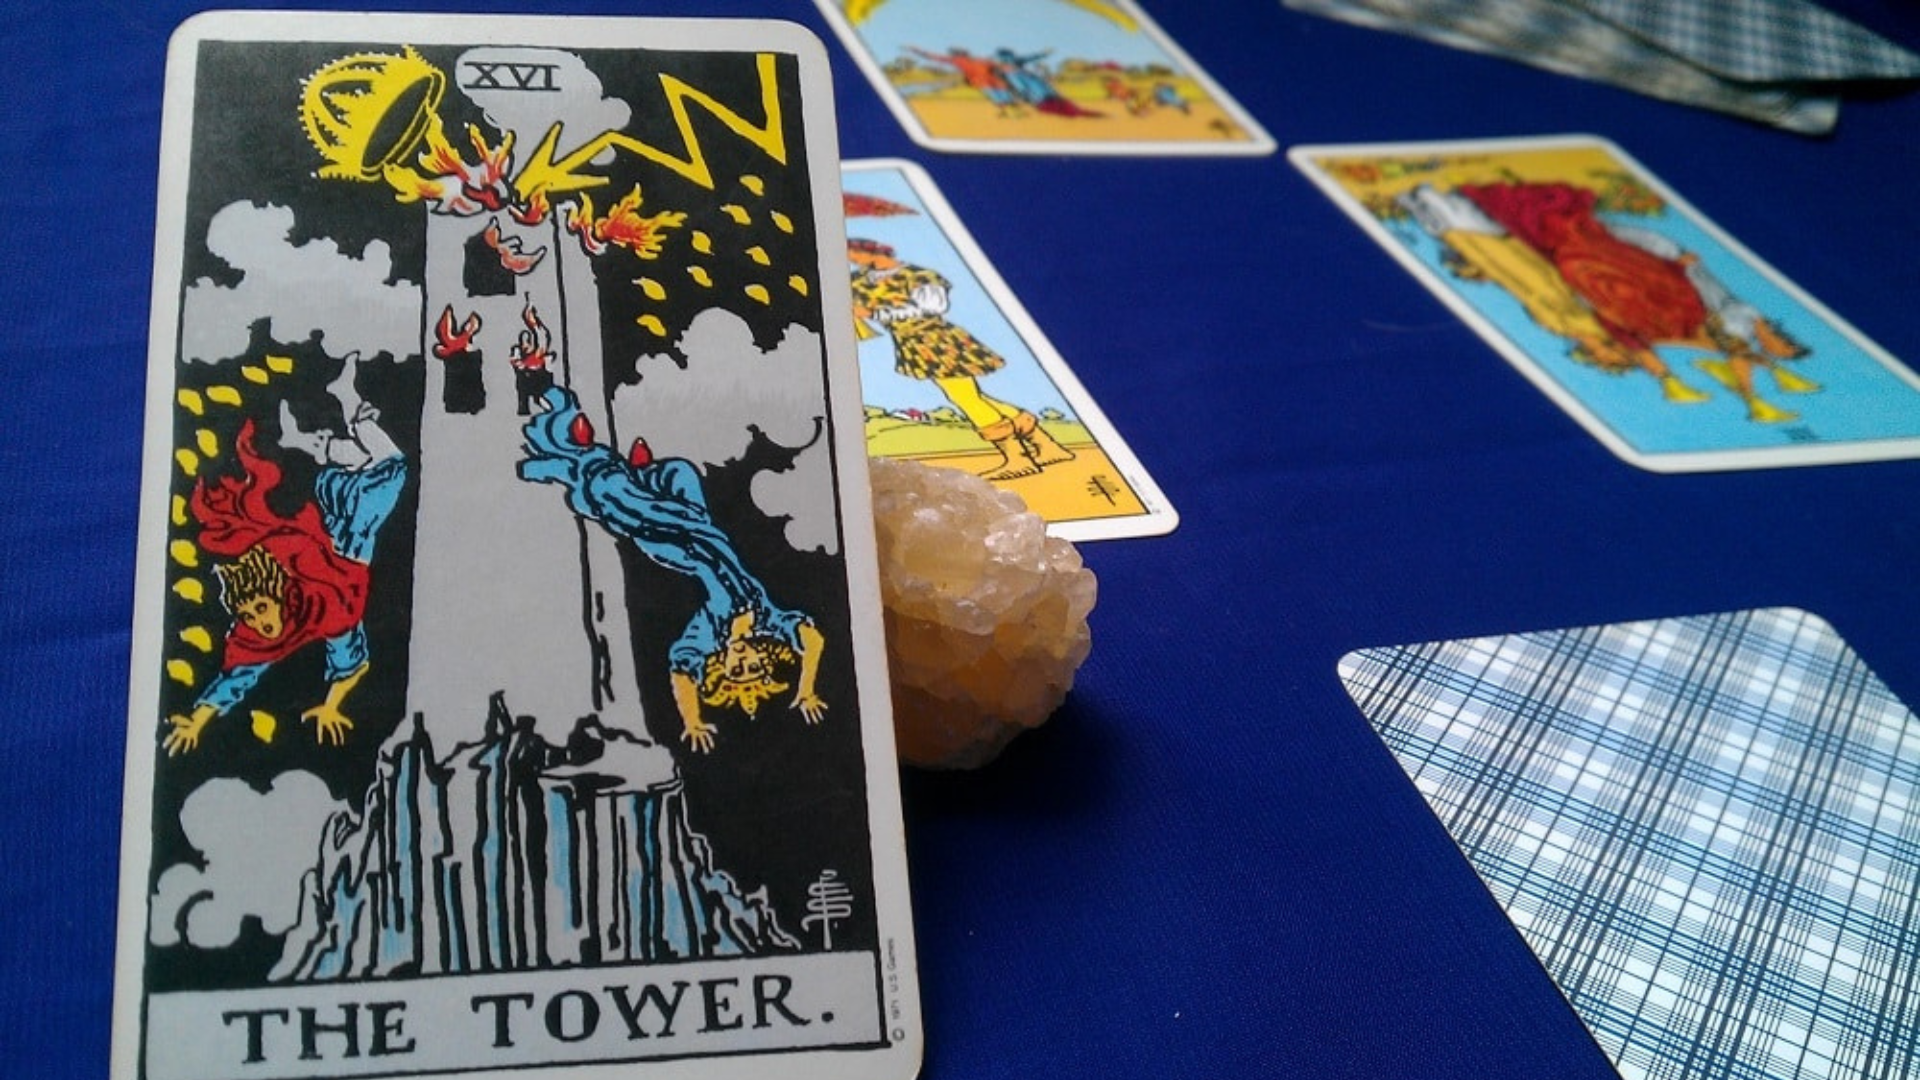 A tower tarot card placed on a blue table along with other cards and a crystal